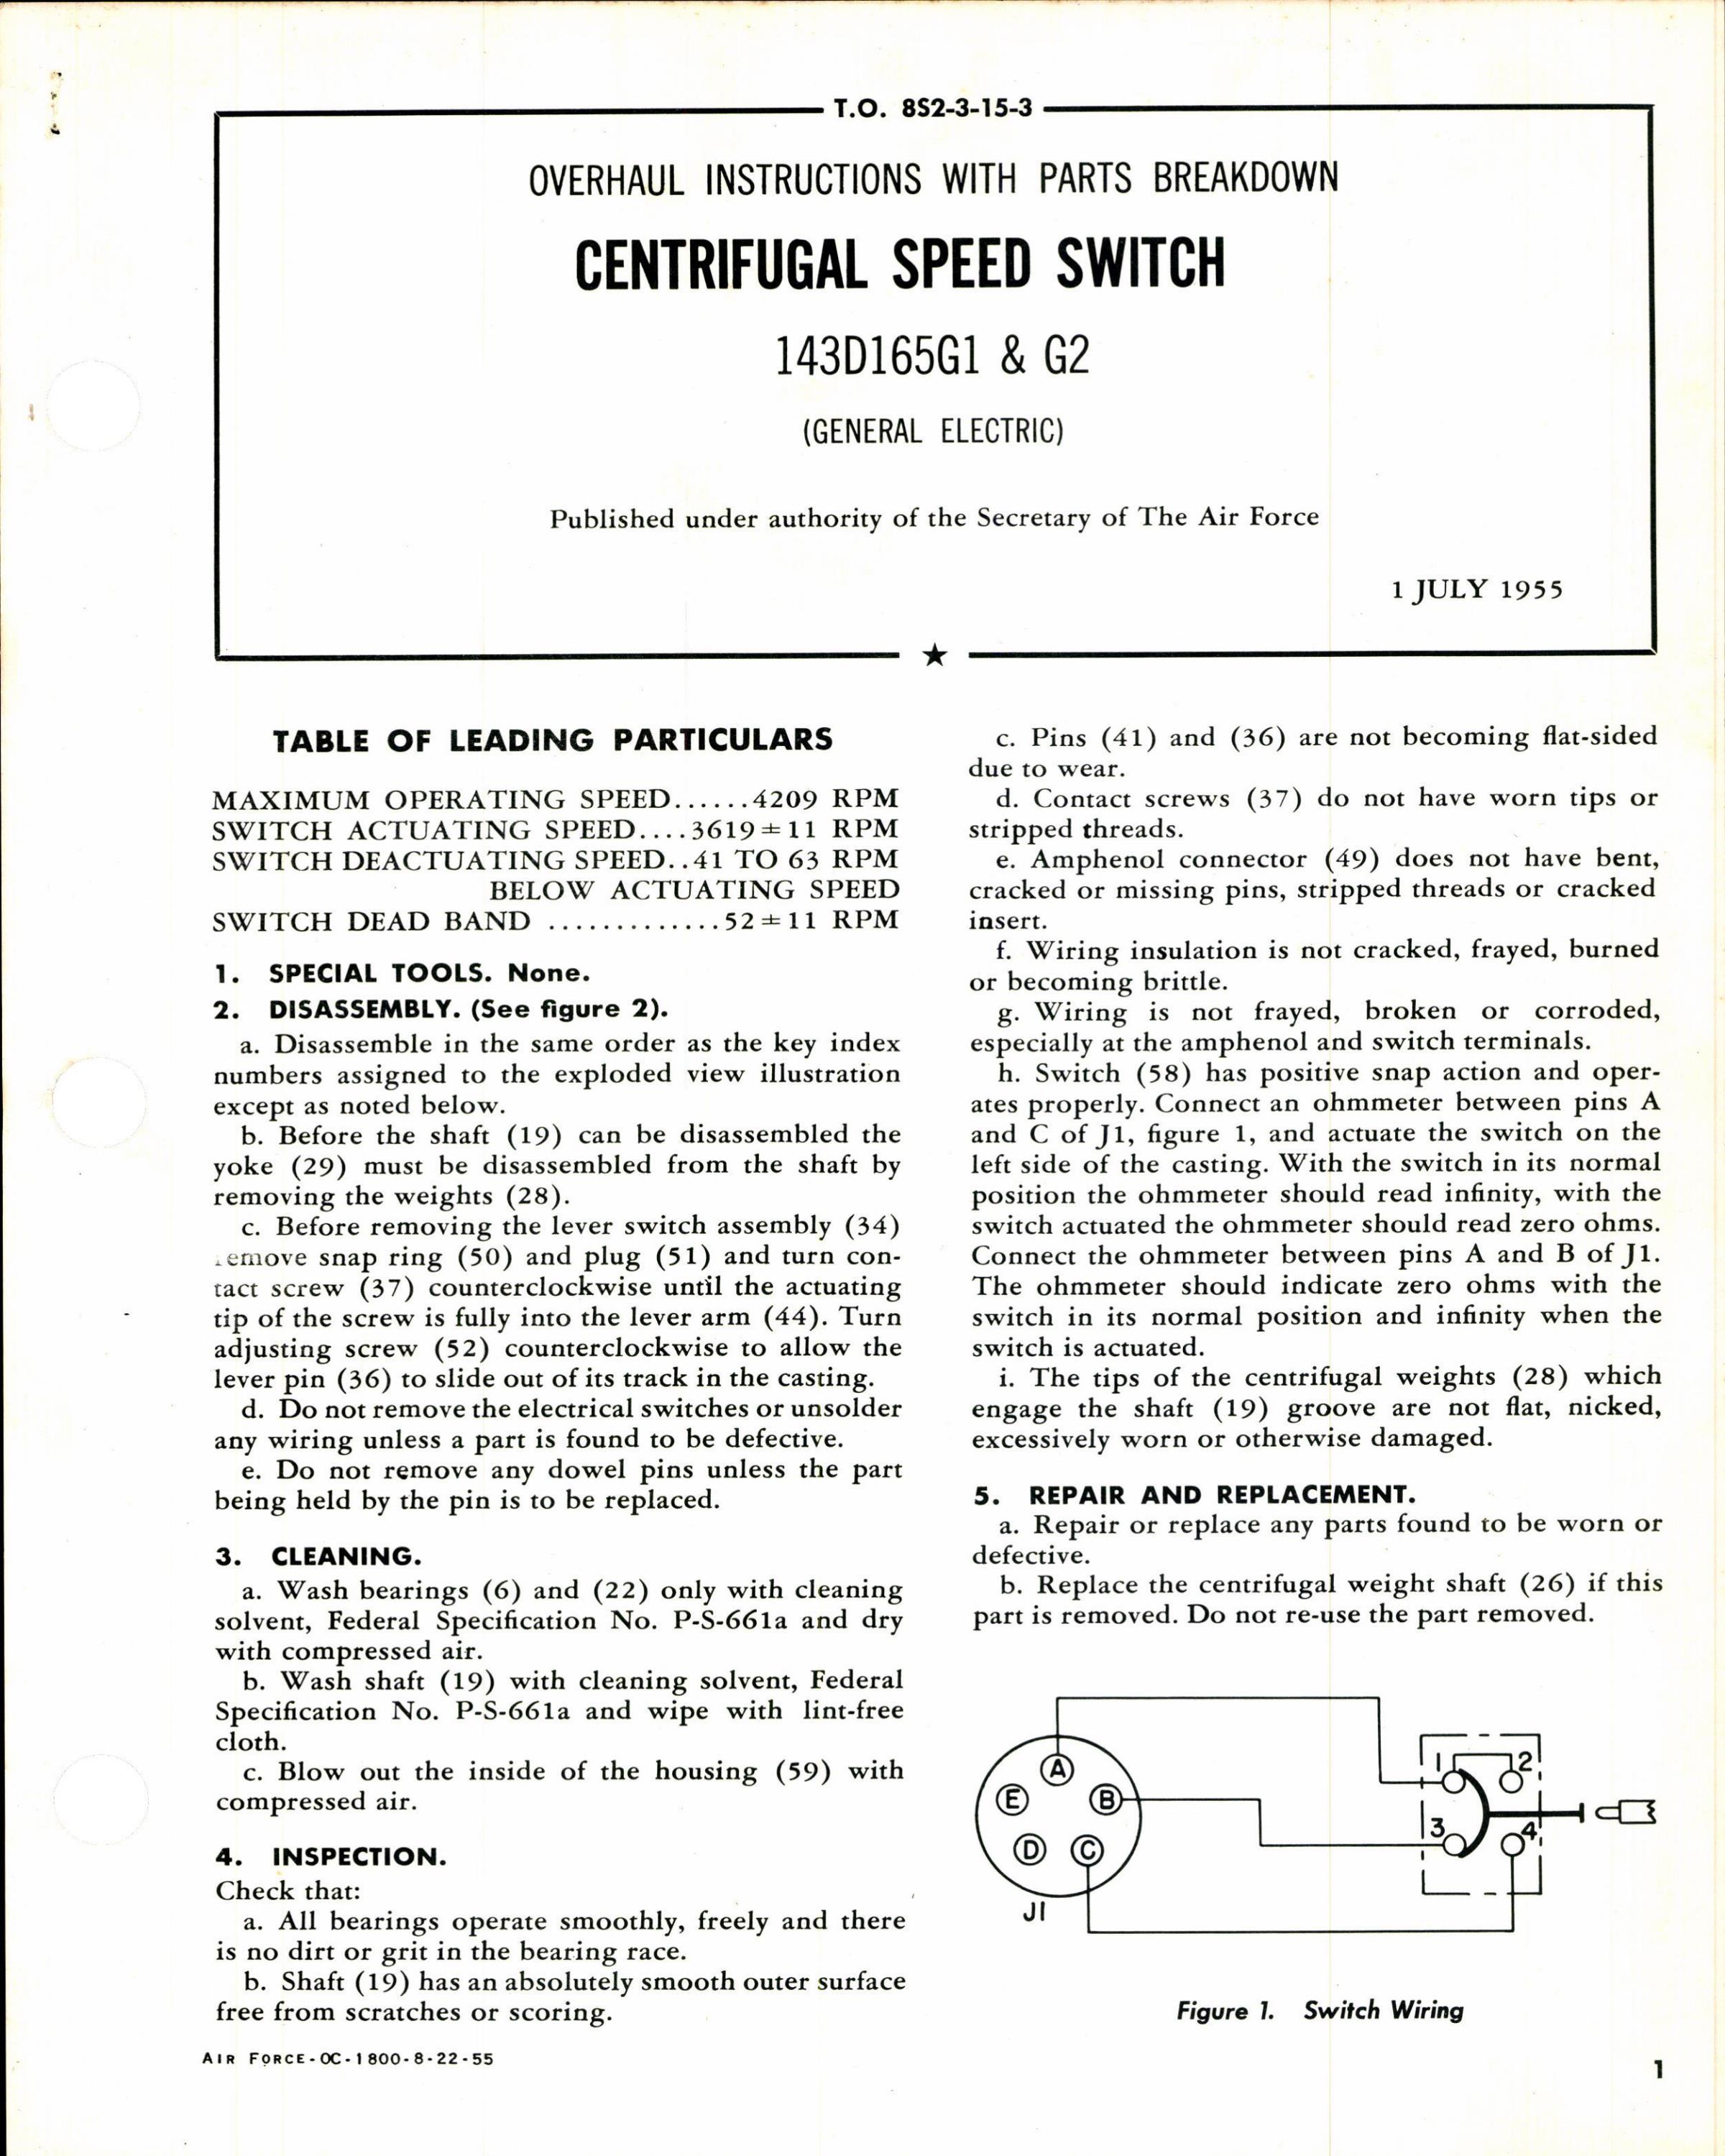 Sample page 1 from AirCorps Library document: Overhaul Instructions with Parts Breakdown for Centrifugal Speed Switch 143D165G1 and G2